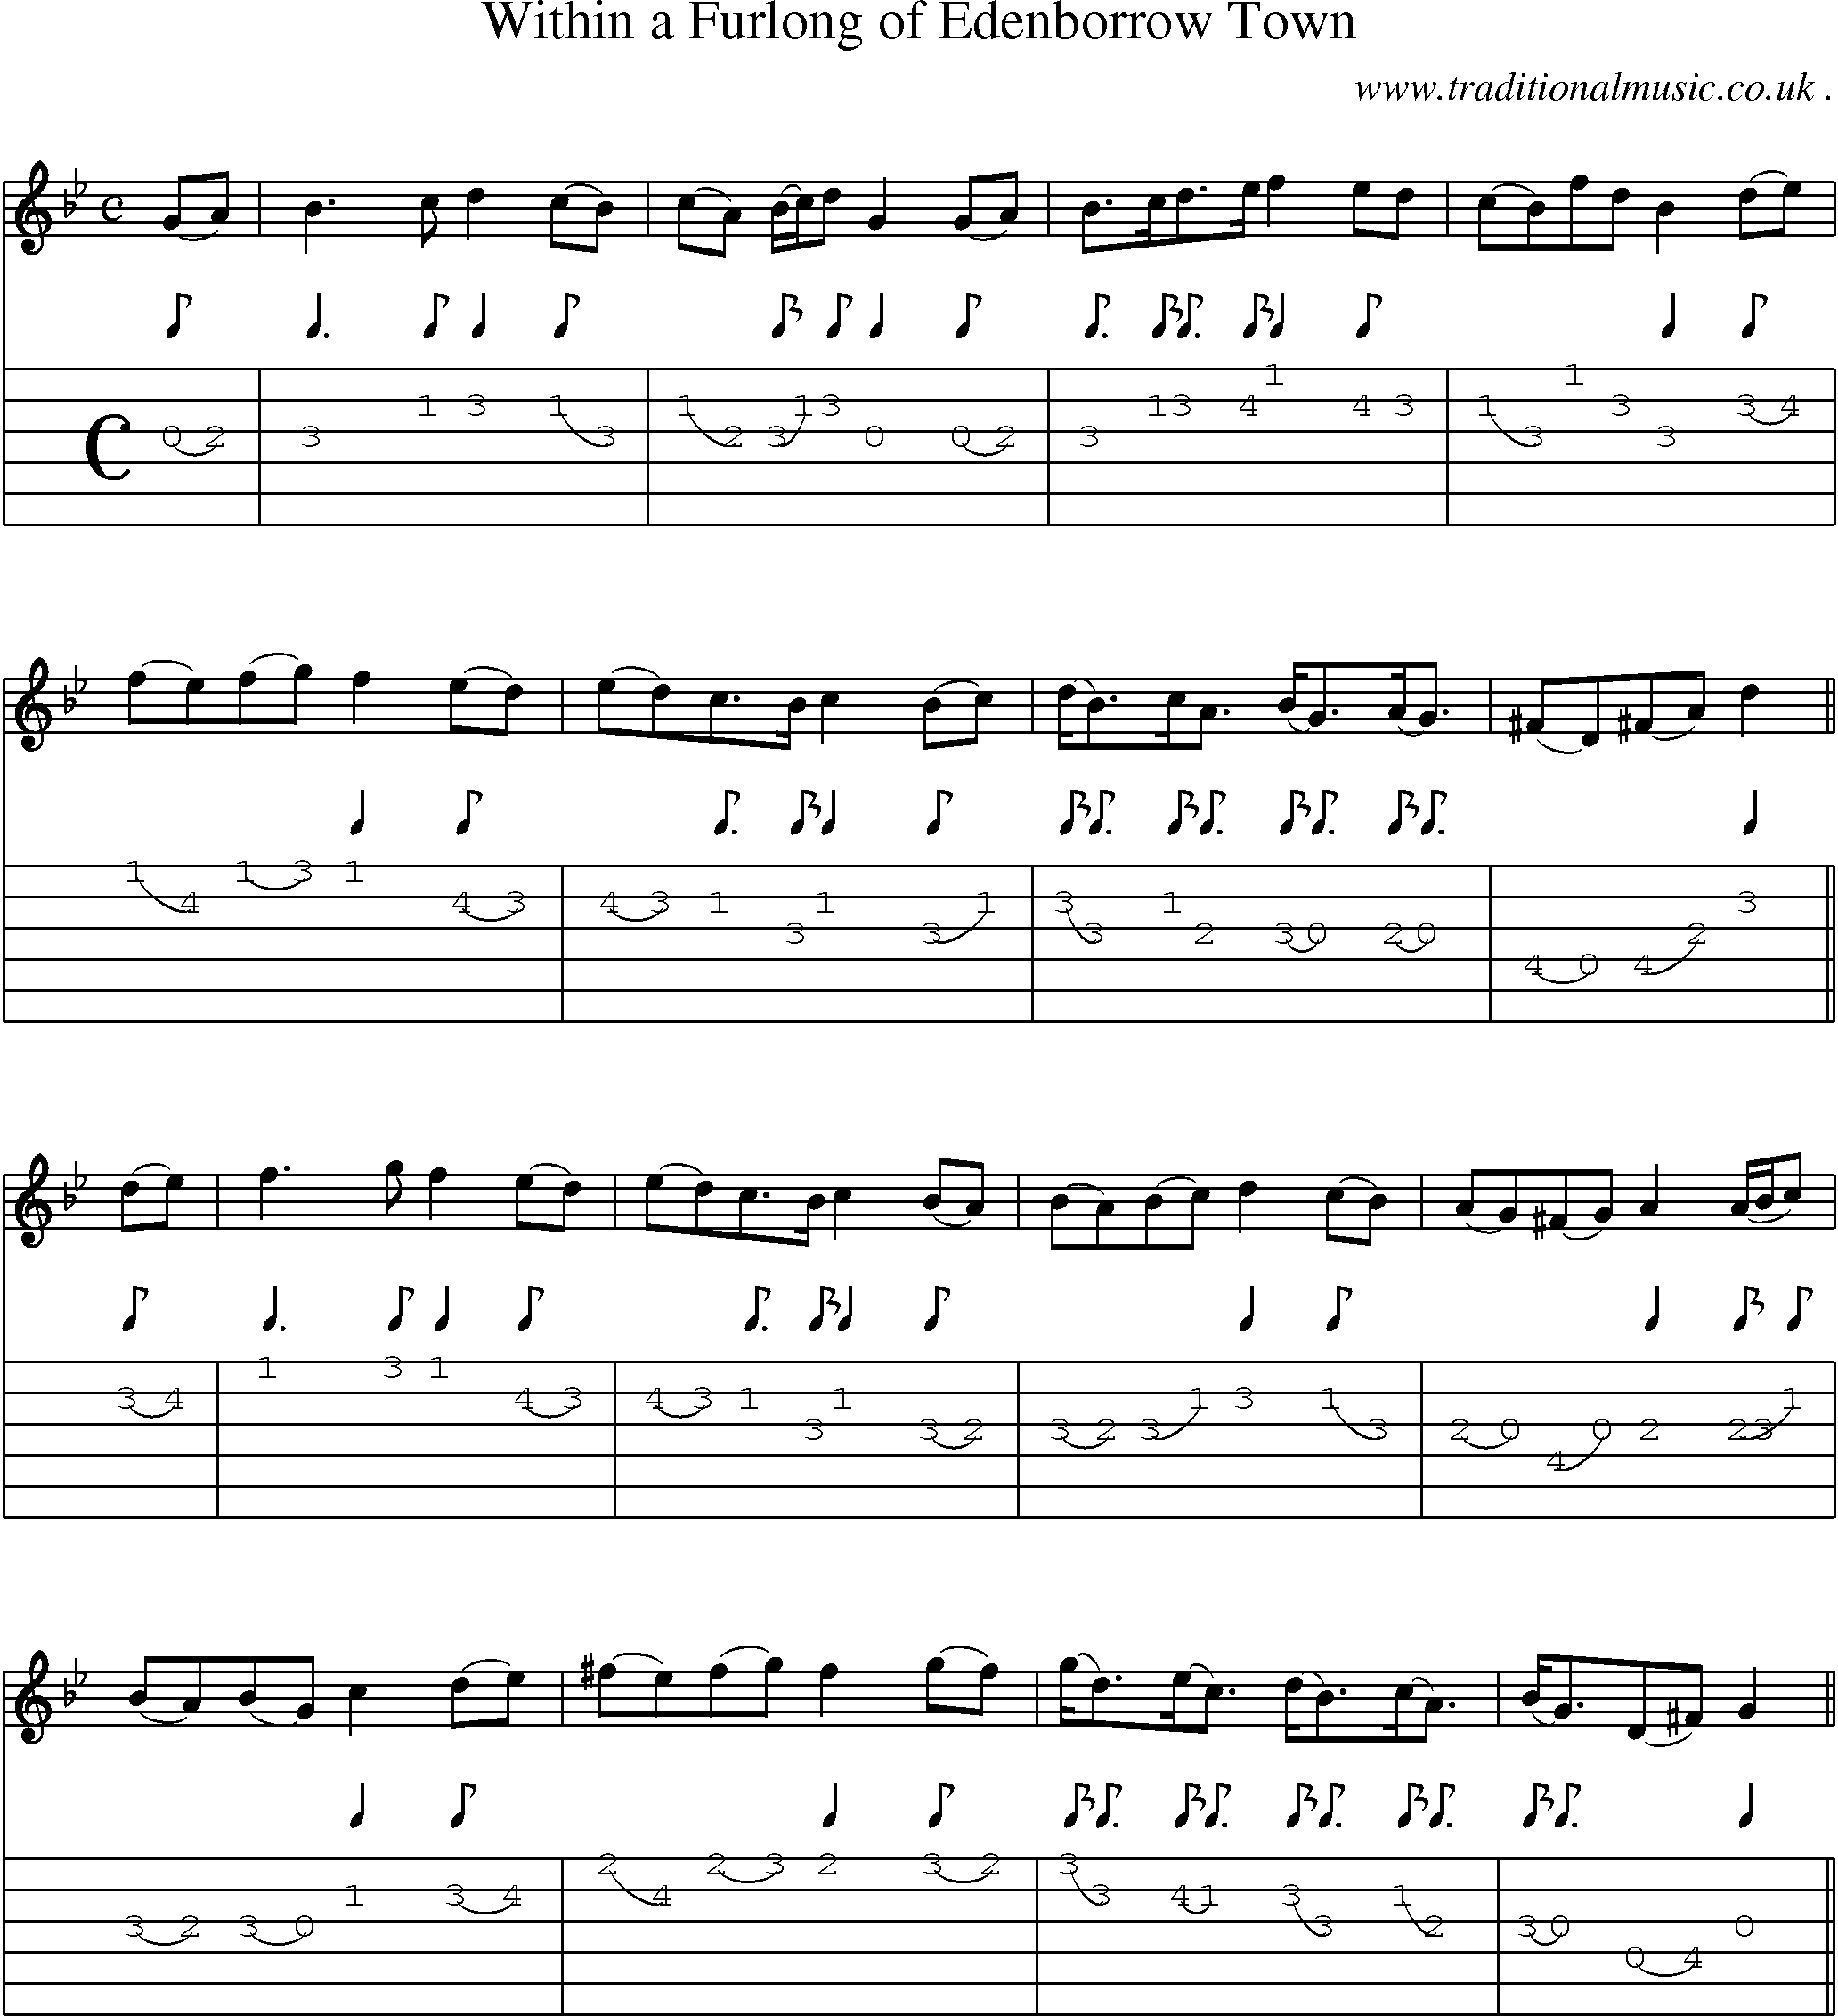 Sheet-Music and Guitar Tabs for Within A Furlong Of Edenborrow Town